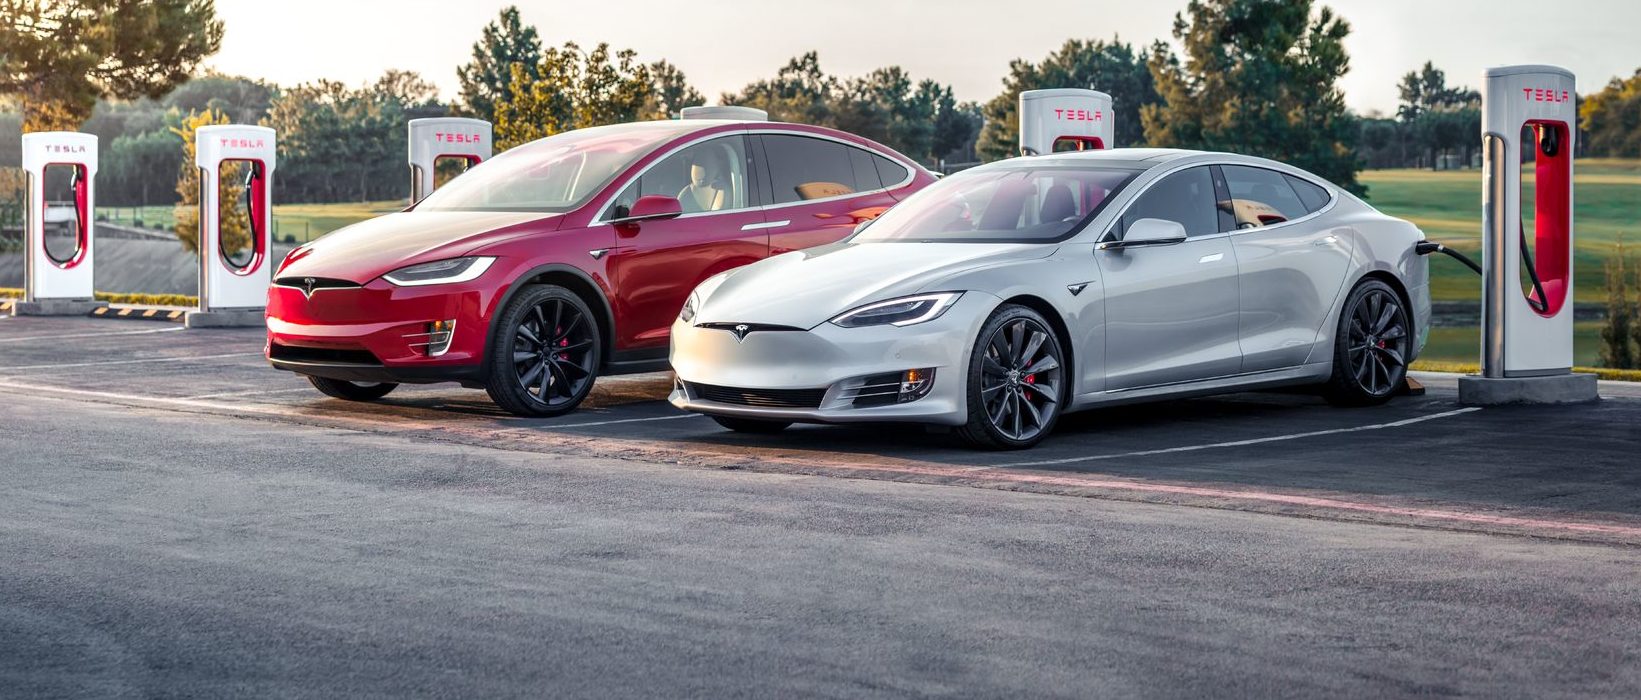 Tesla Lowers Model S And Model X Price Standardizes Battery Pack